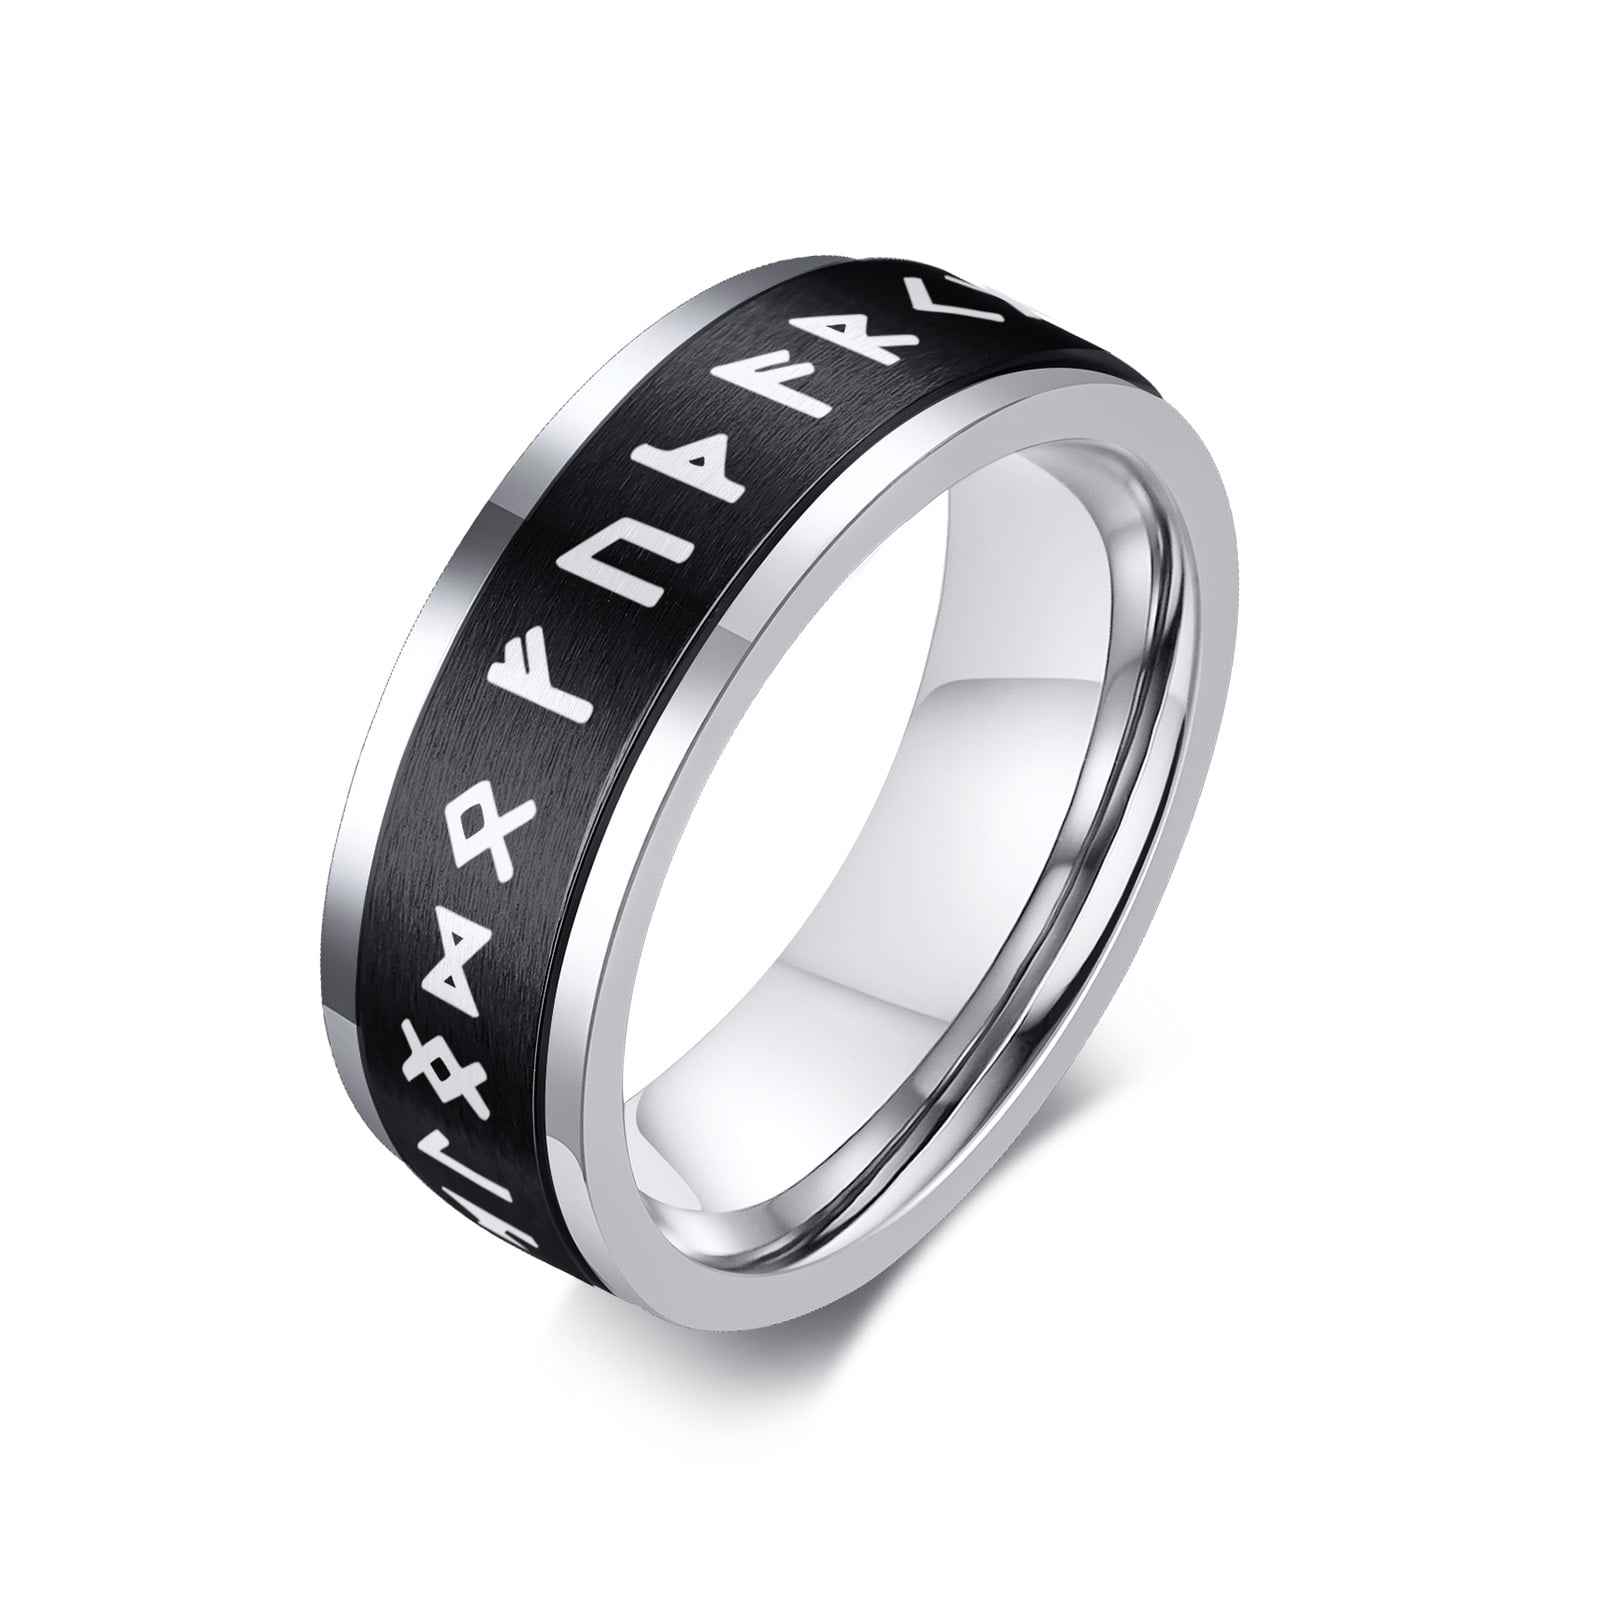 Stainless Steel Roman Numeral Spinner Ring Relieve Stress Rotation Fidget Ring Band Spin Anxiety Rings for Men Women Girls Boy Anti Anxiety Gifts 